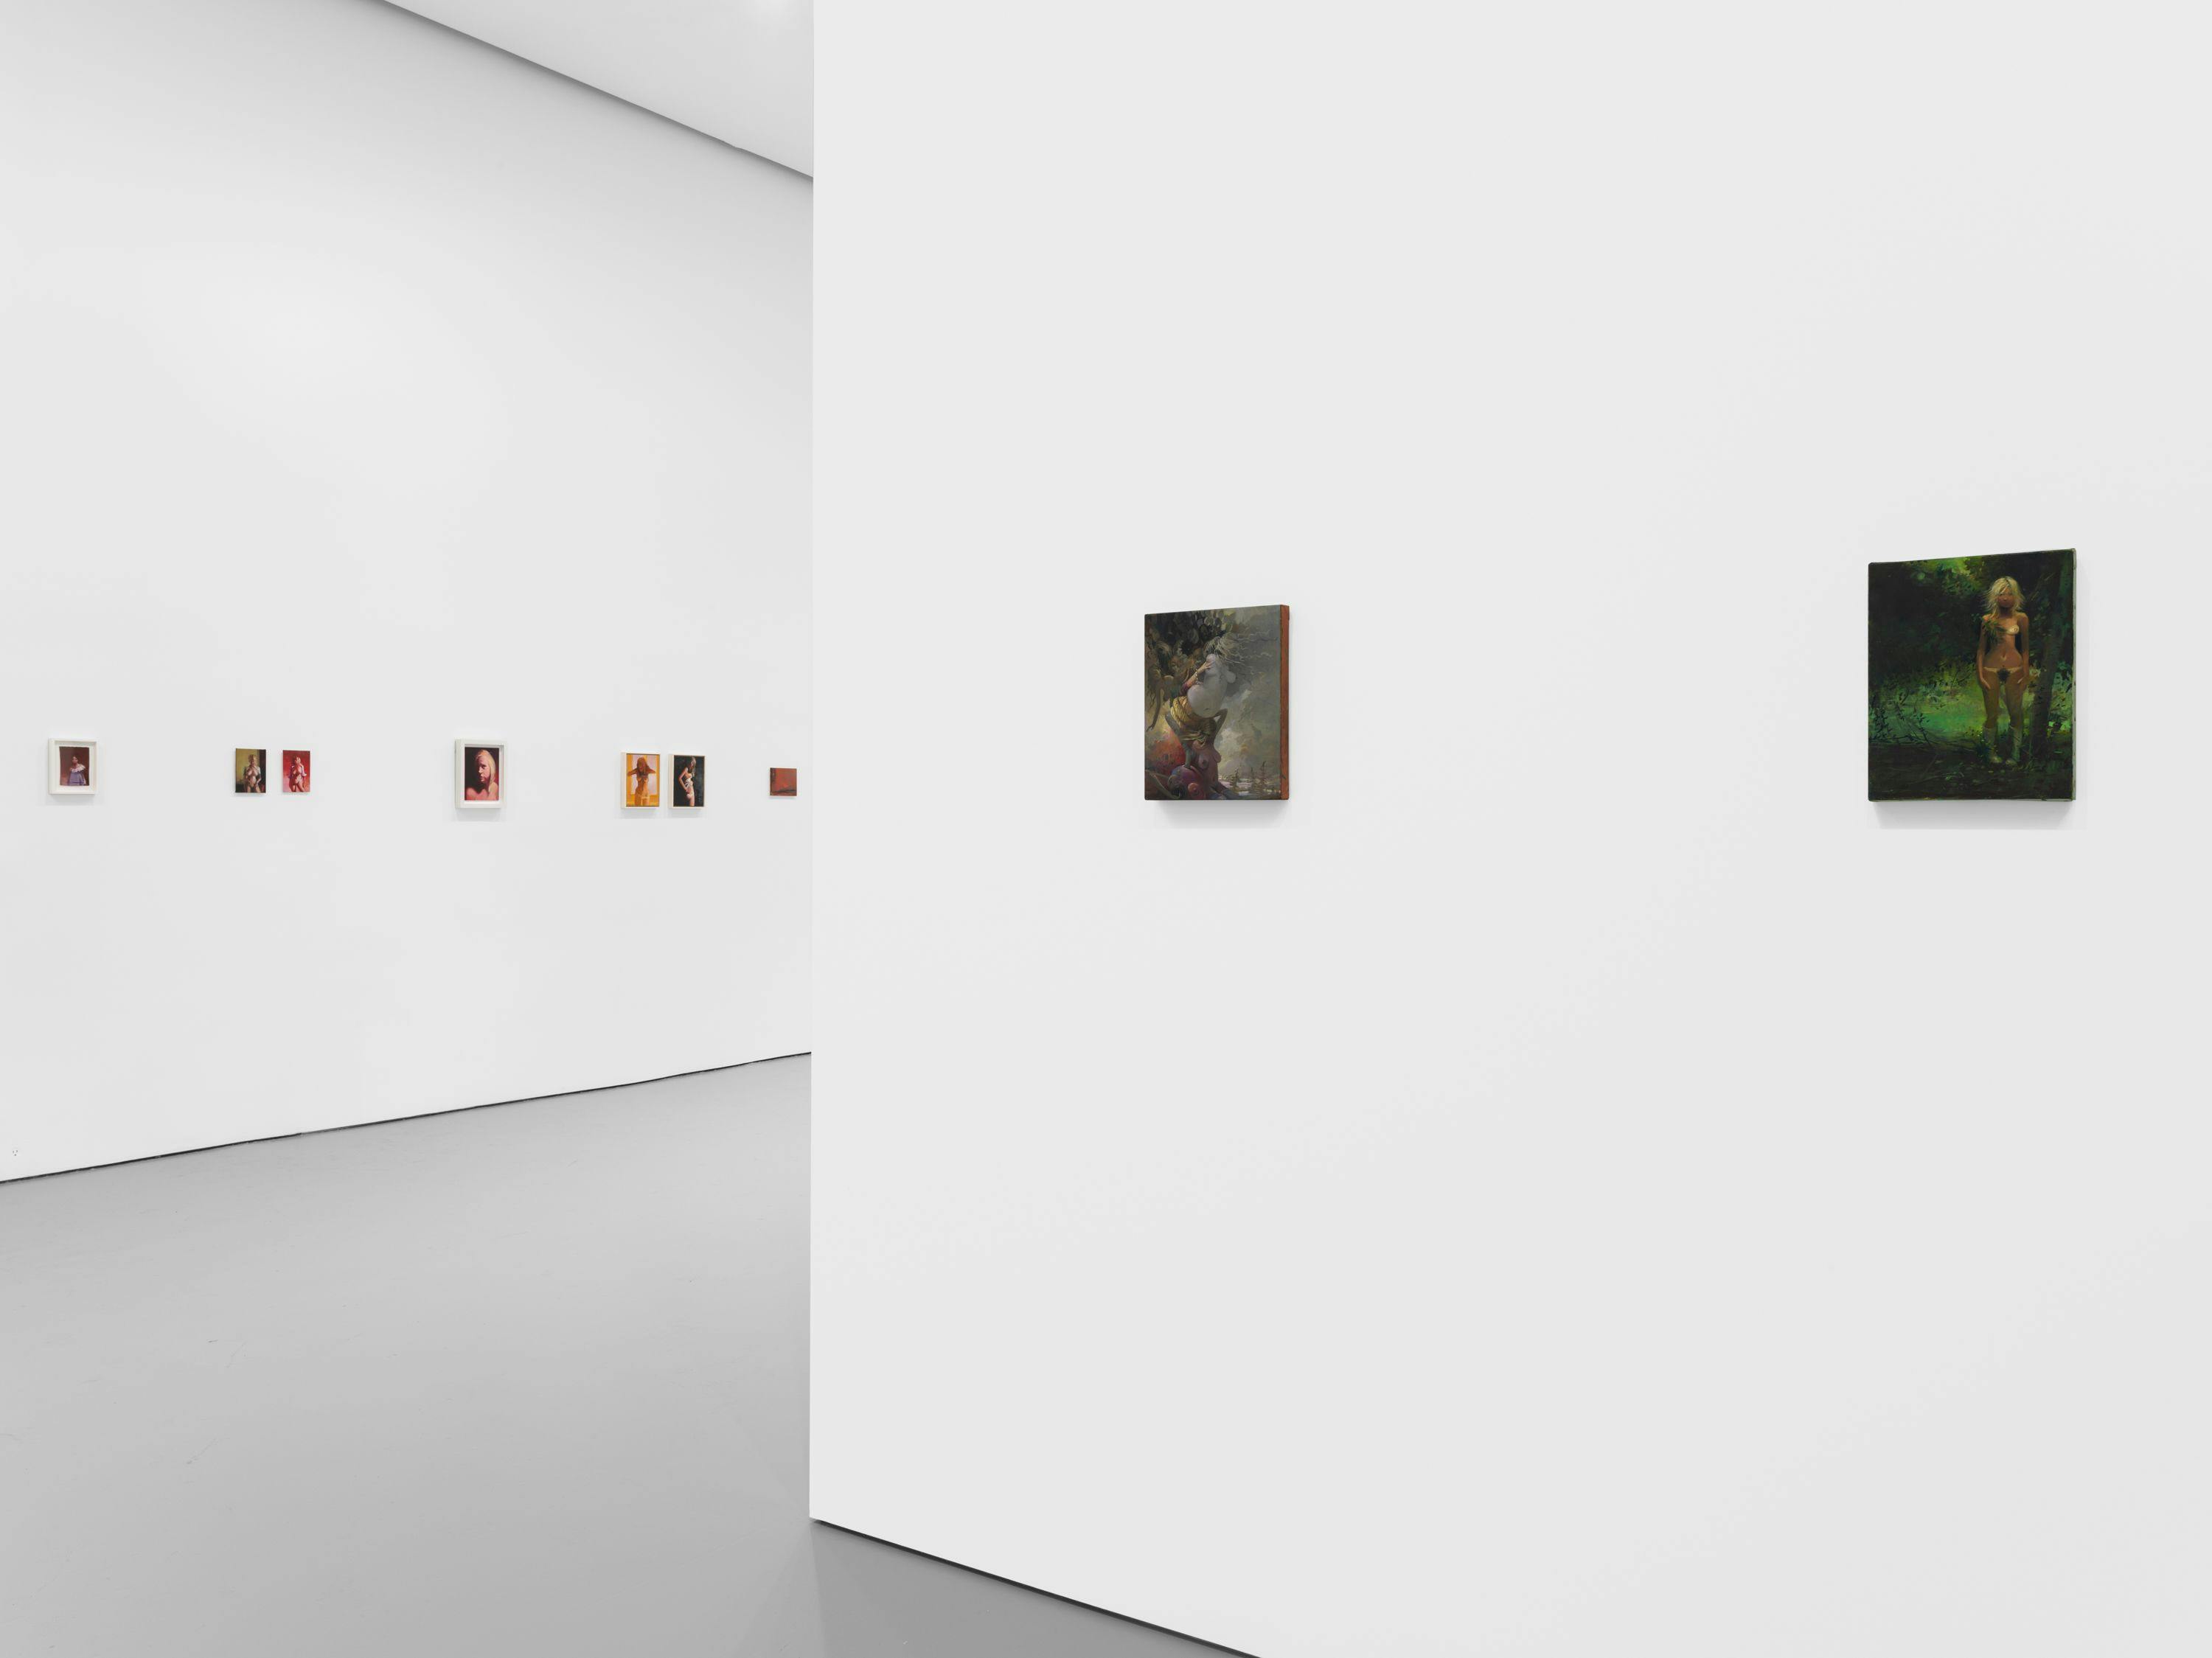 Installation view of the exhibition, Lisa Yuskavage: Babie Brood: Small Paintings 1985 - 2018, at David Zwirner in New York, dated 2018.